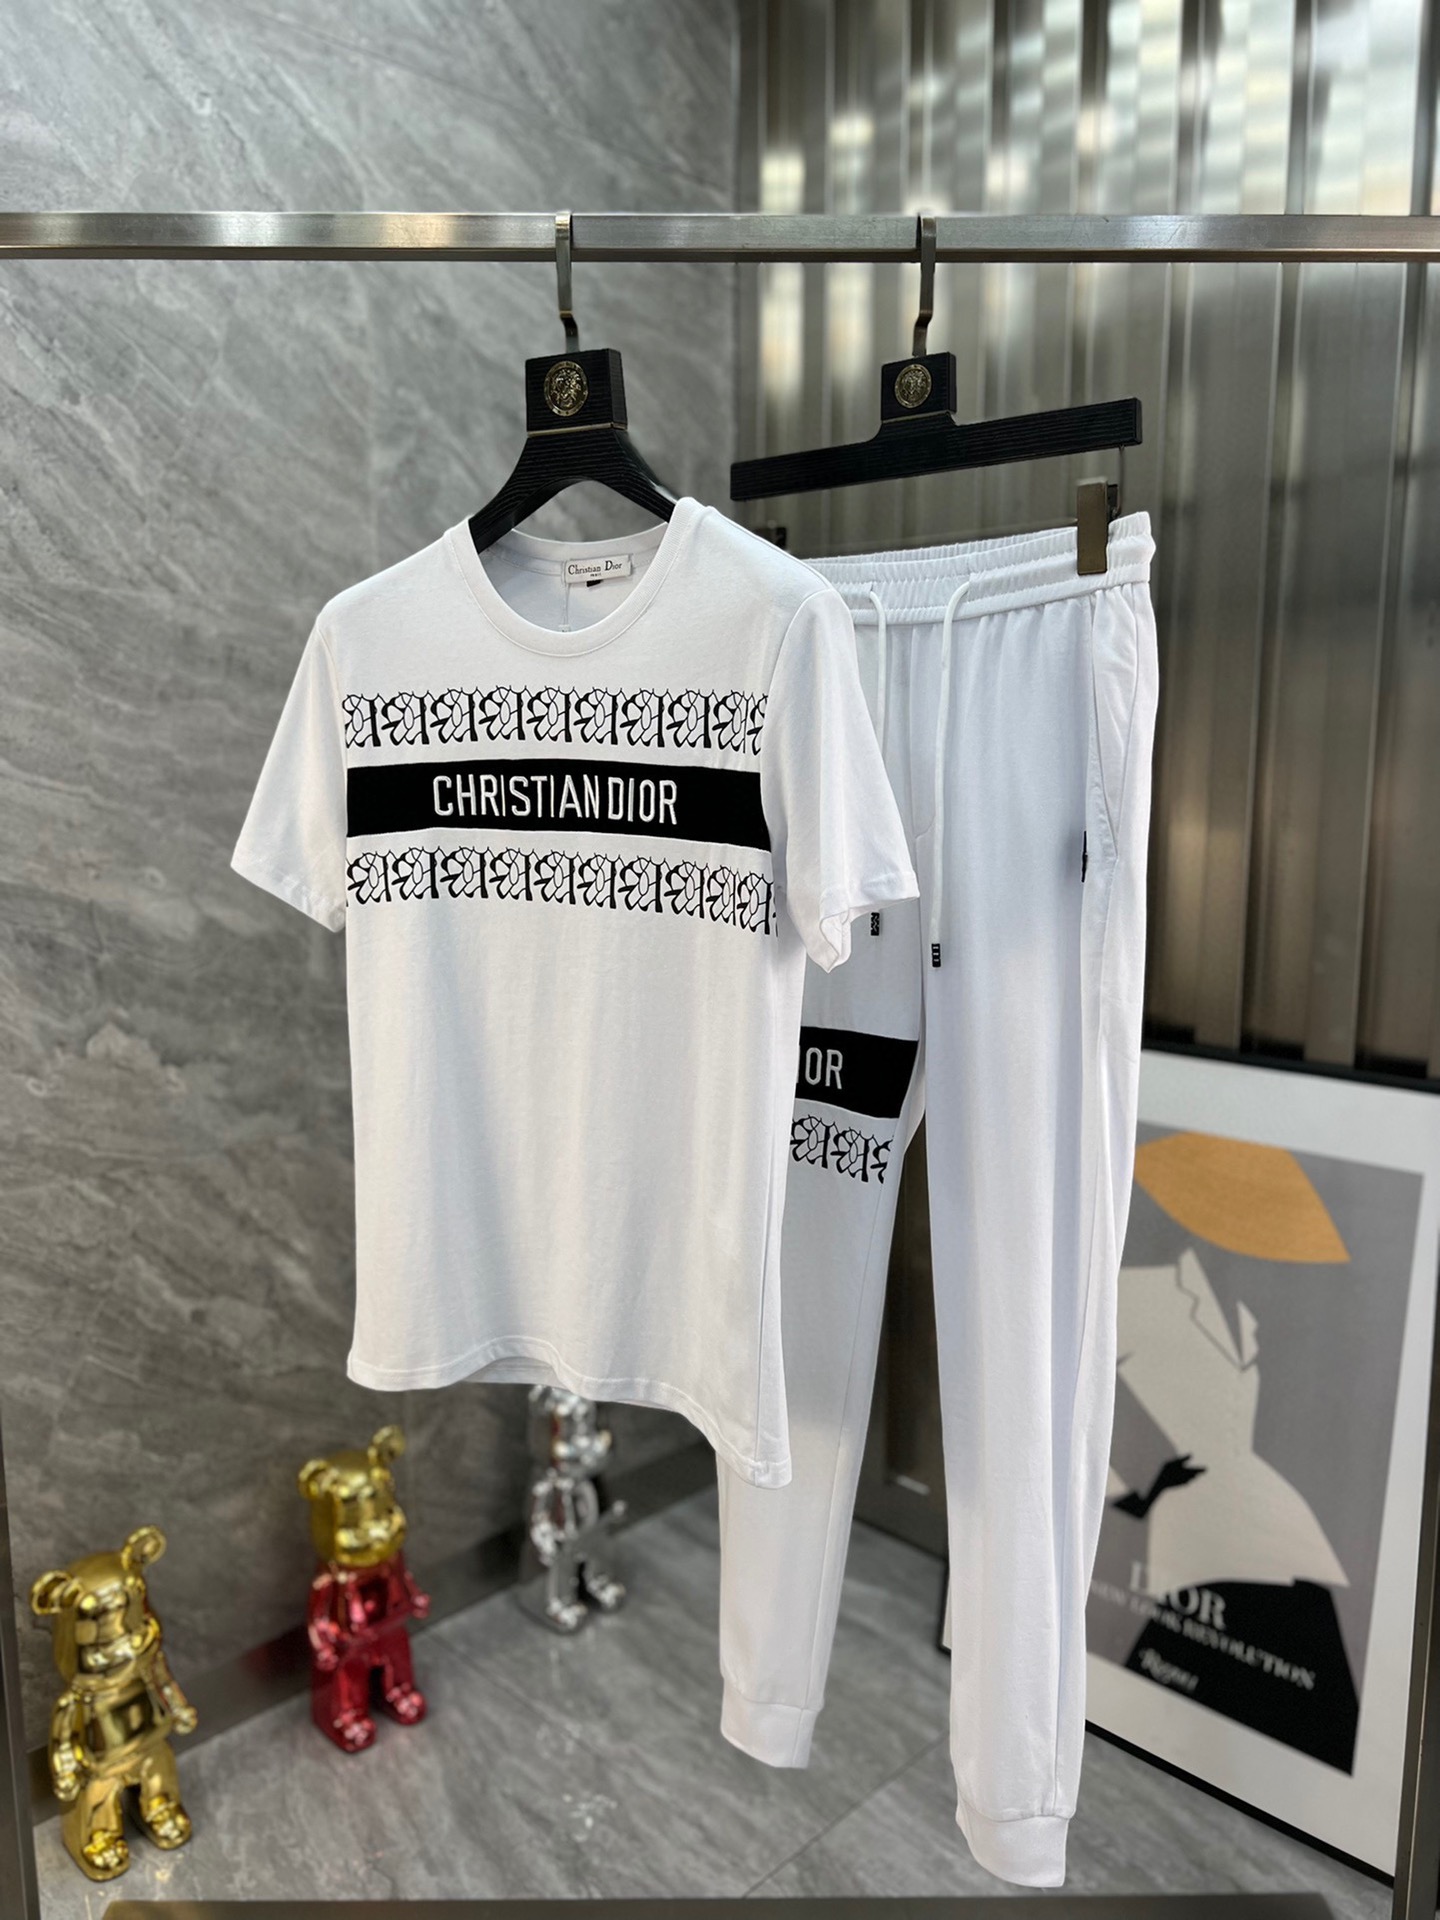 Dior Clothing T-Shirt Two Piece Outfits & Matching Sets Men Summer Collection Fashion Short Sleeve